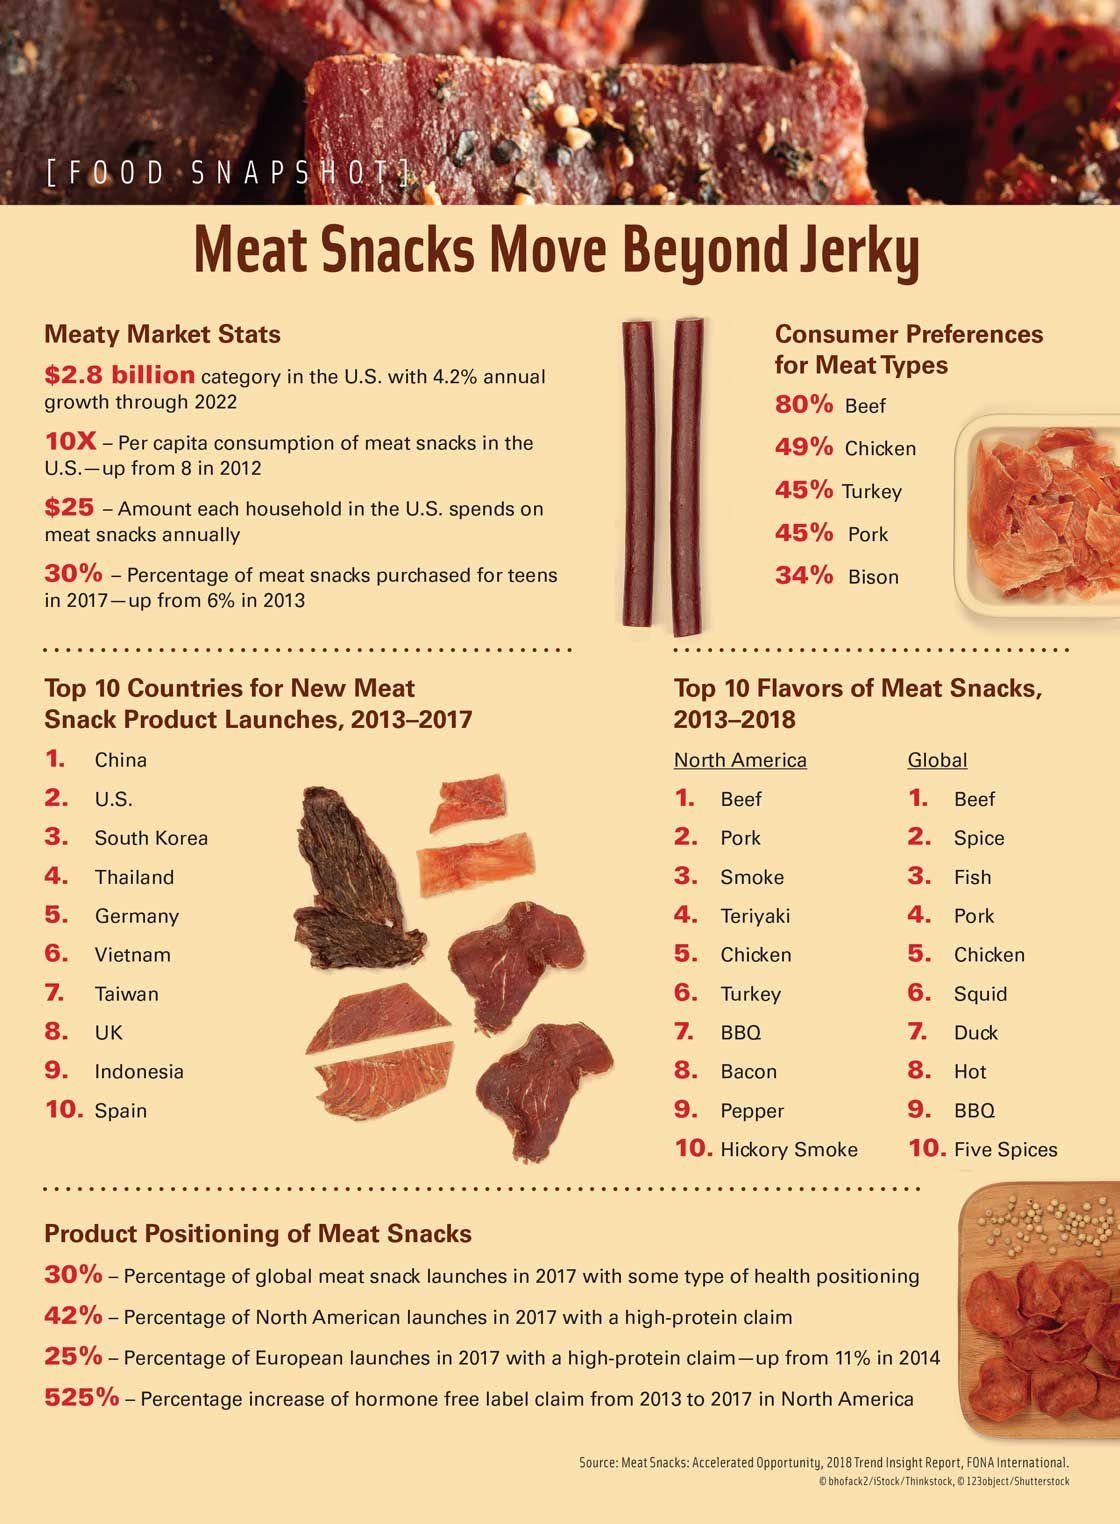 Meat Snacks Move Beyond Jerky. Source: Meat Snacks: Accelerated Opportunity, 2018 Trend Insight Report, FONA International.